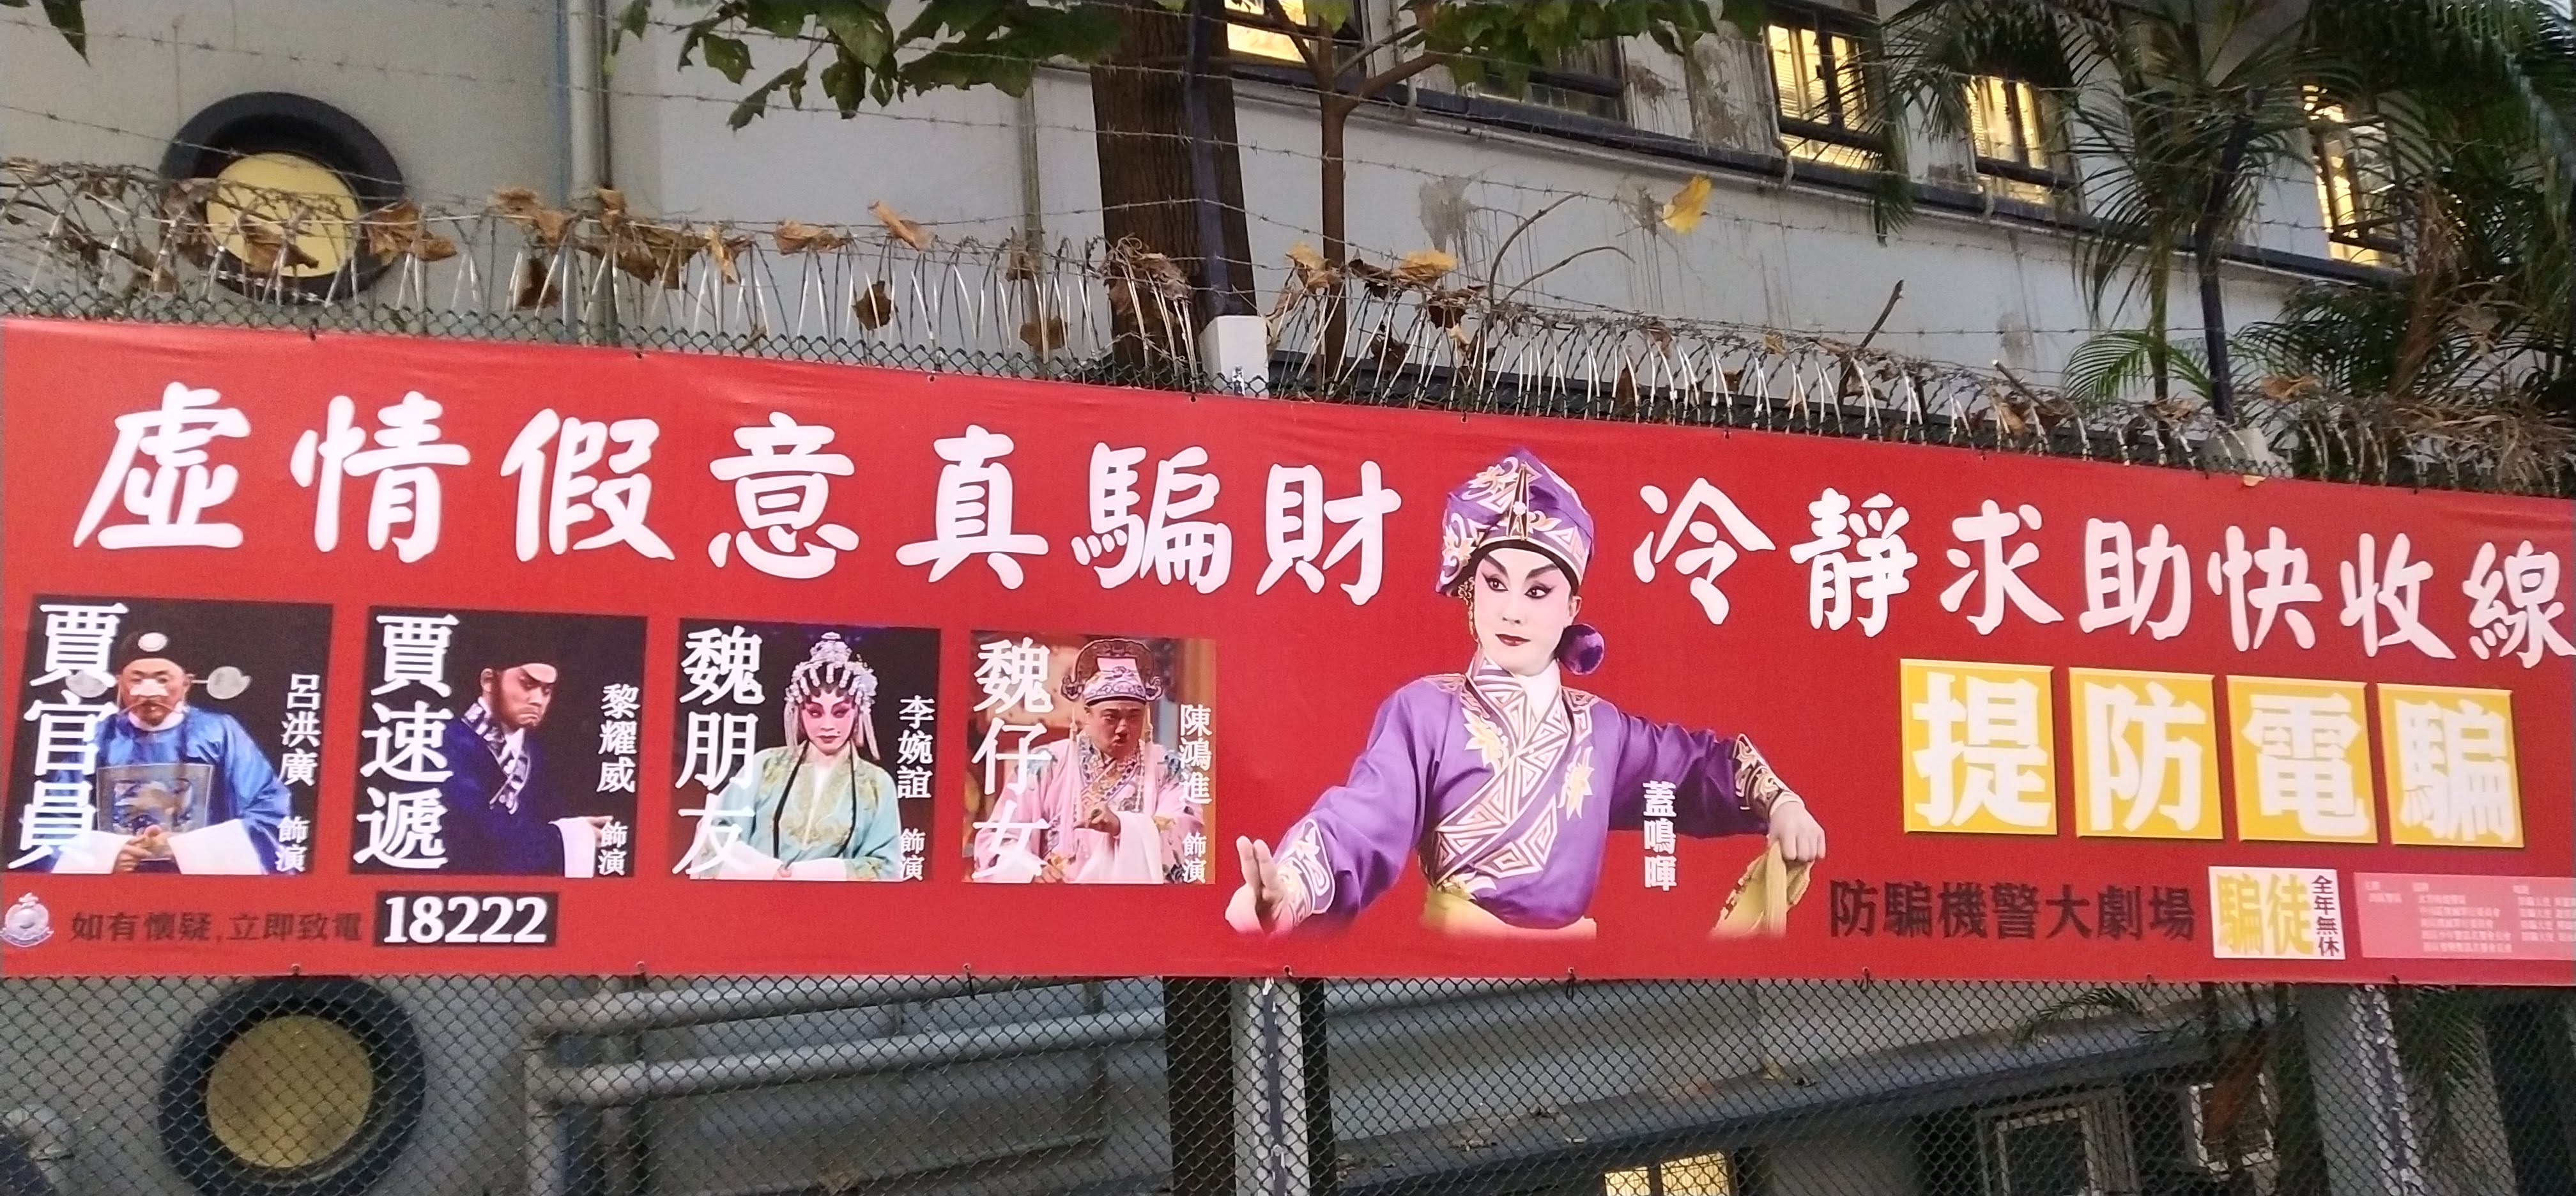 Share Frank's post about the anti-fraud banner which shows Cantonese opera makeup